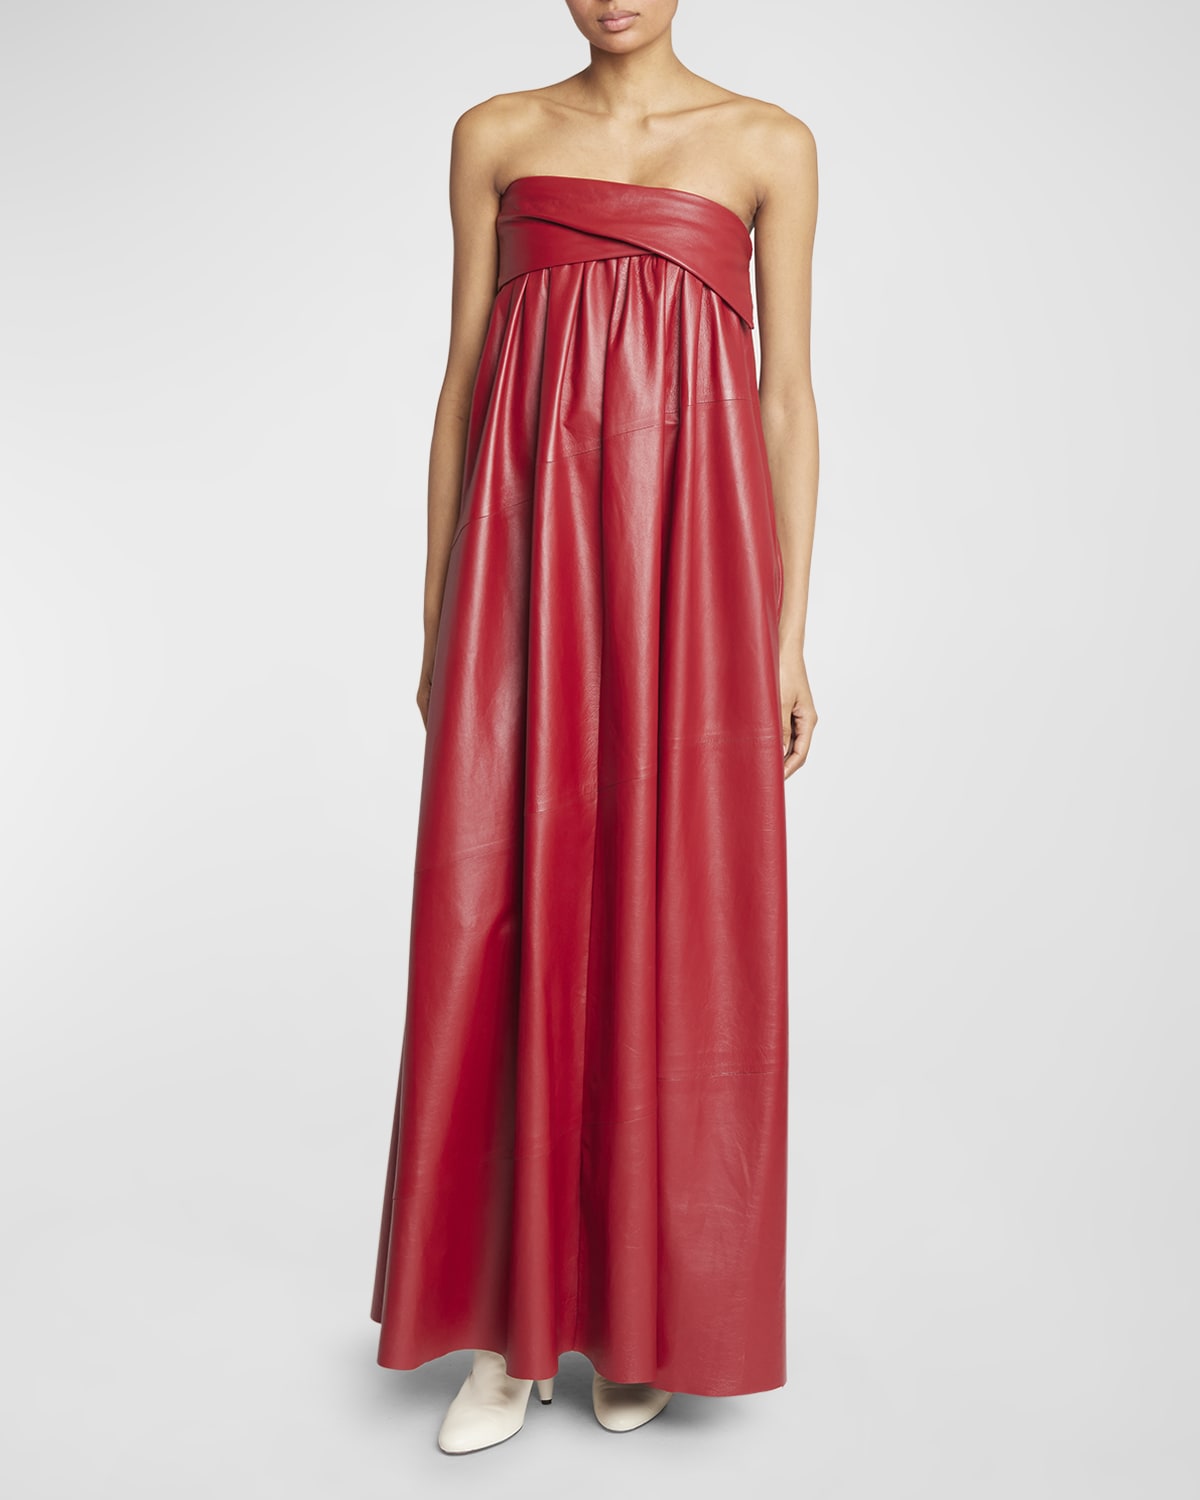 PROENZA SCHOULER NAPPA LEATHER EMPIRE-WAIST STRAPLESS GOWN